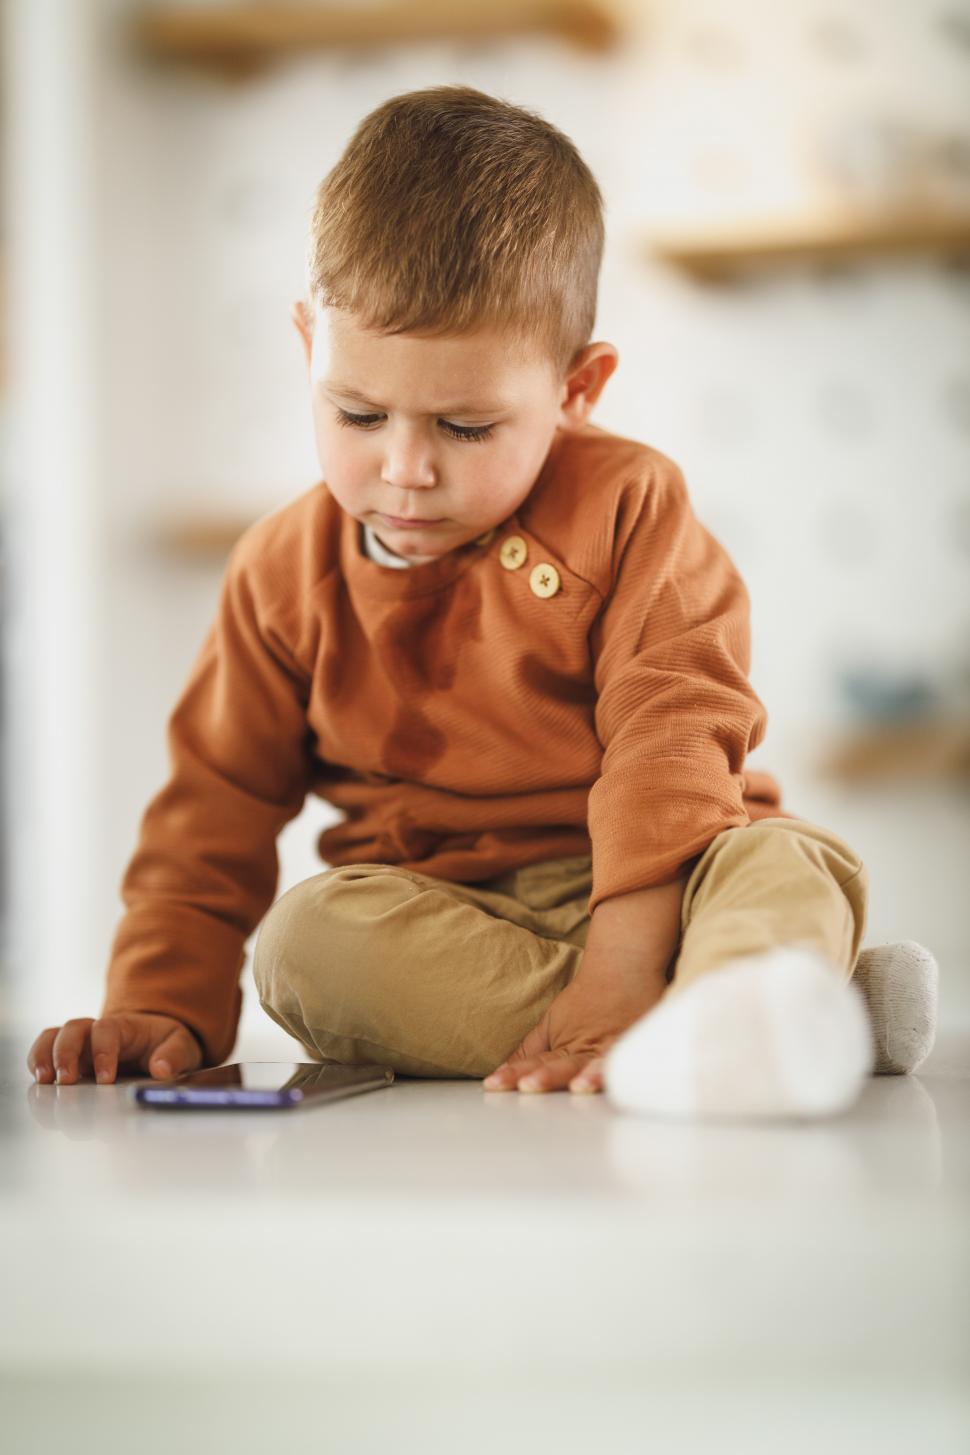 Free Image of Toddler boy with mobile phone sitting on the floor 